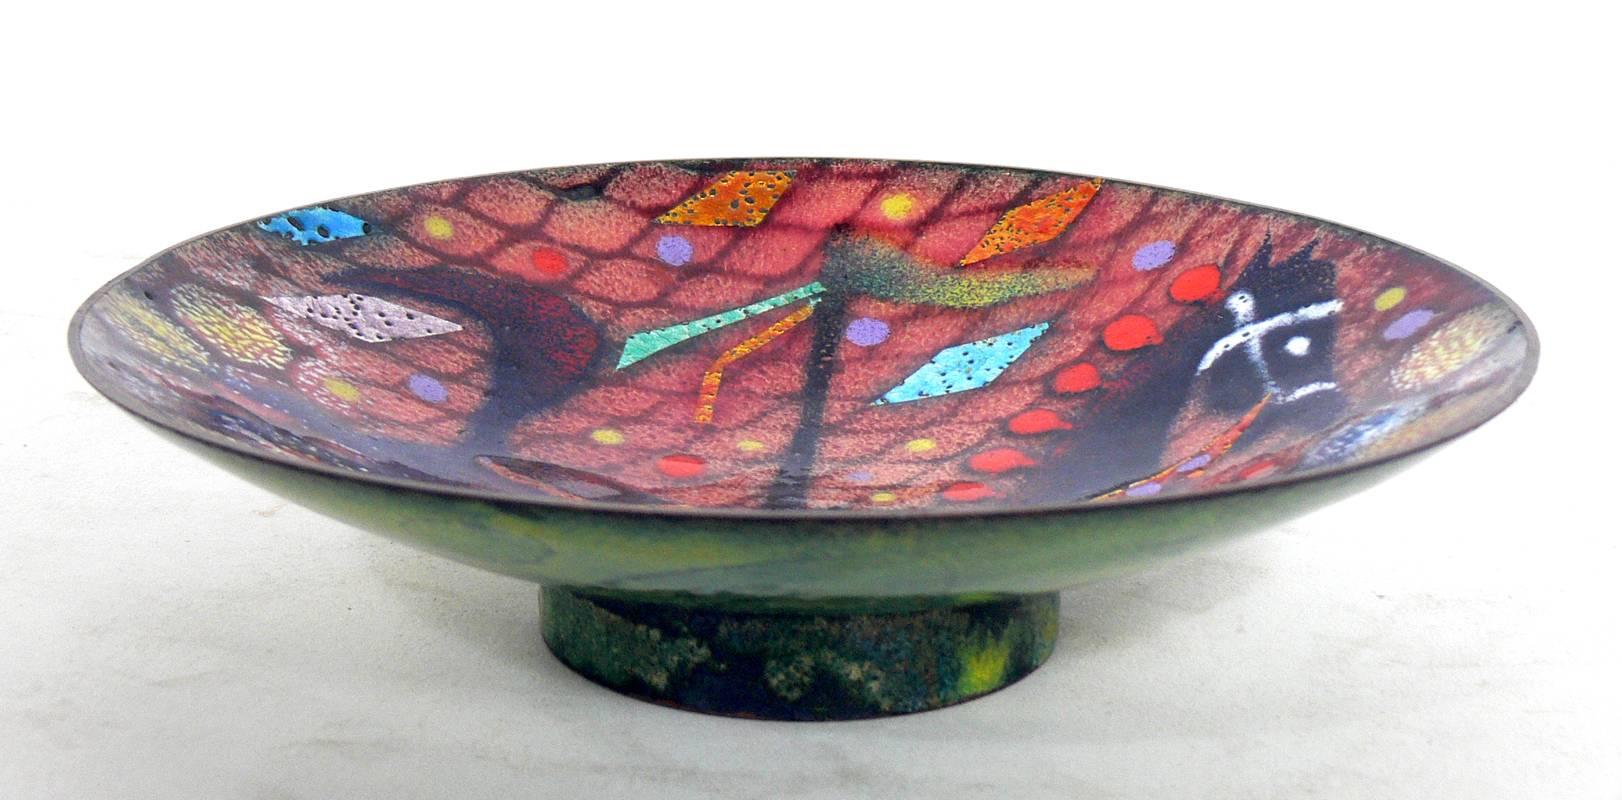 A group of three modern enamels, seen in the photos below. They are:
1) Abstract circular enamel, hand made by Virgil Cantini, circa 1950's. It measures 6